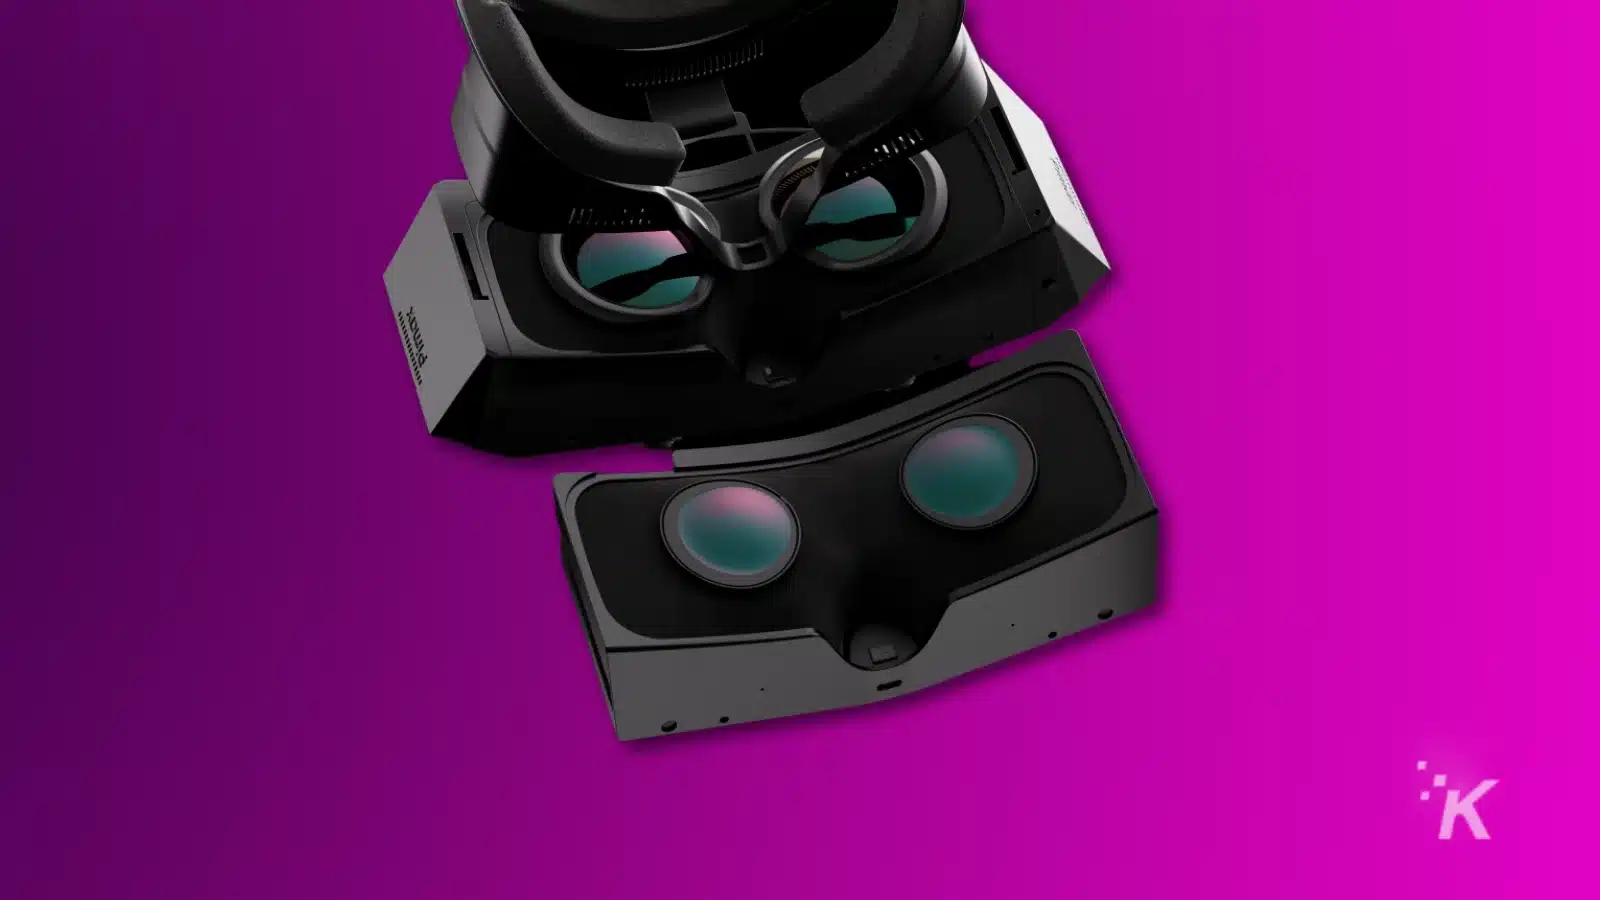 render of a VR headset and optical engine module on purple background.